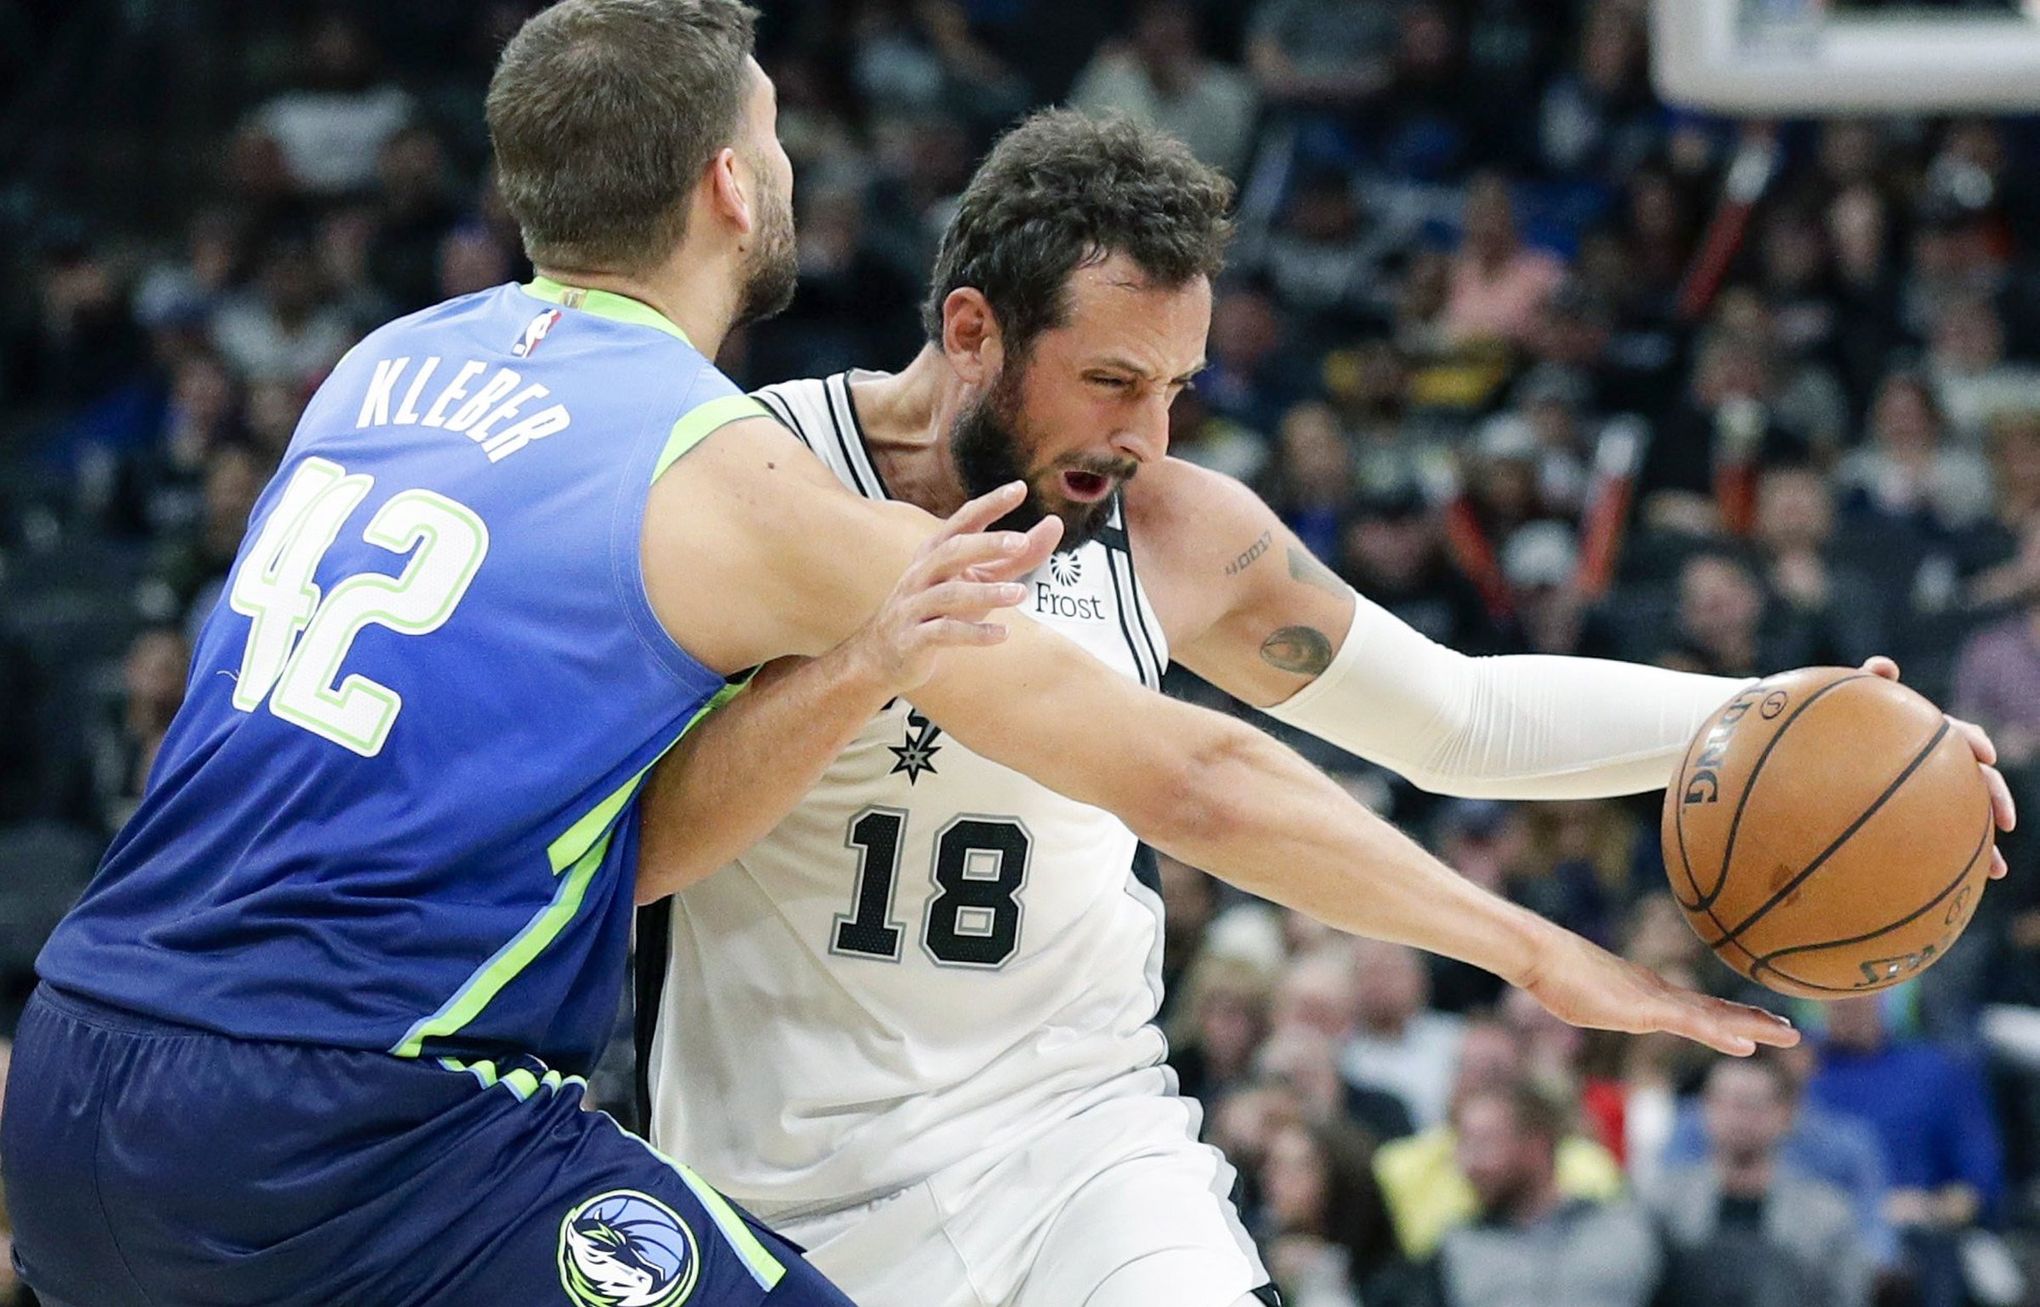 Marco Belinelli leaves Spurs, signs in native Italy - NBC Sports